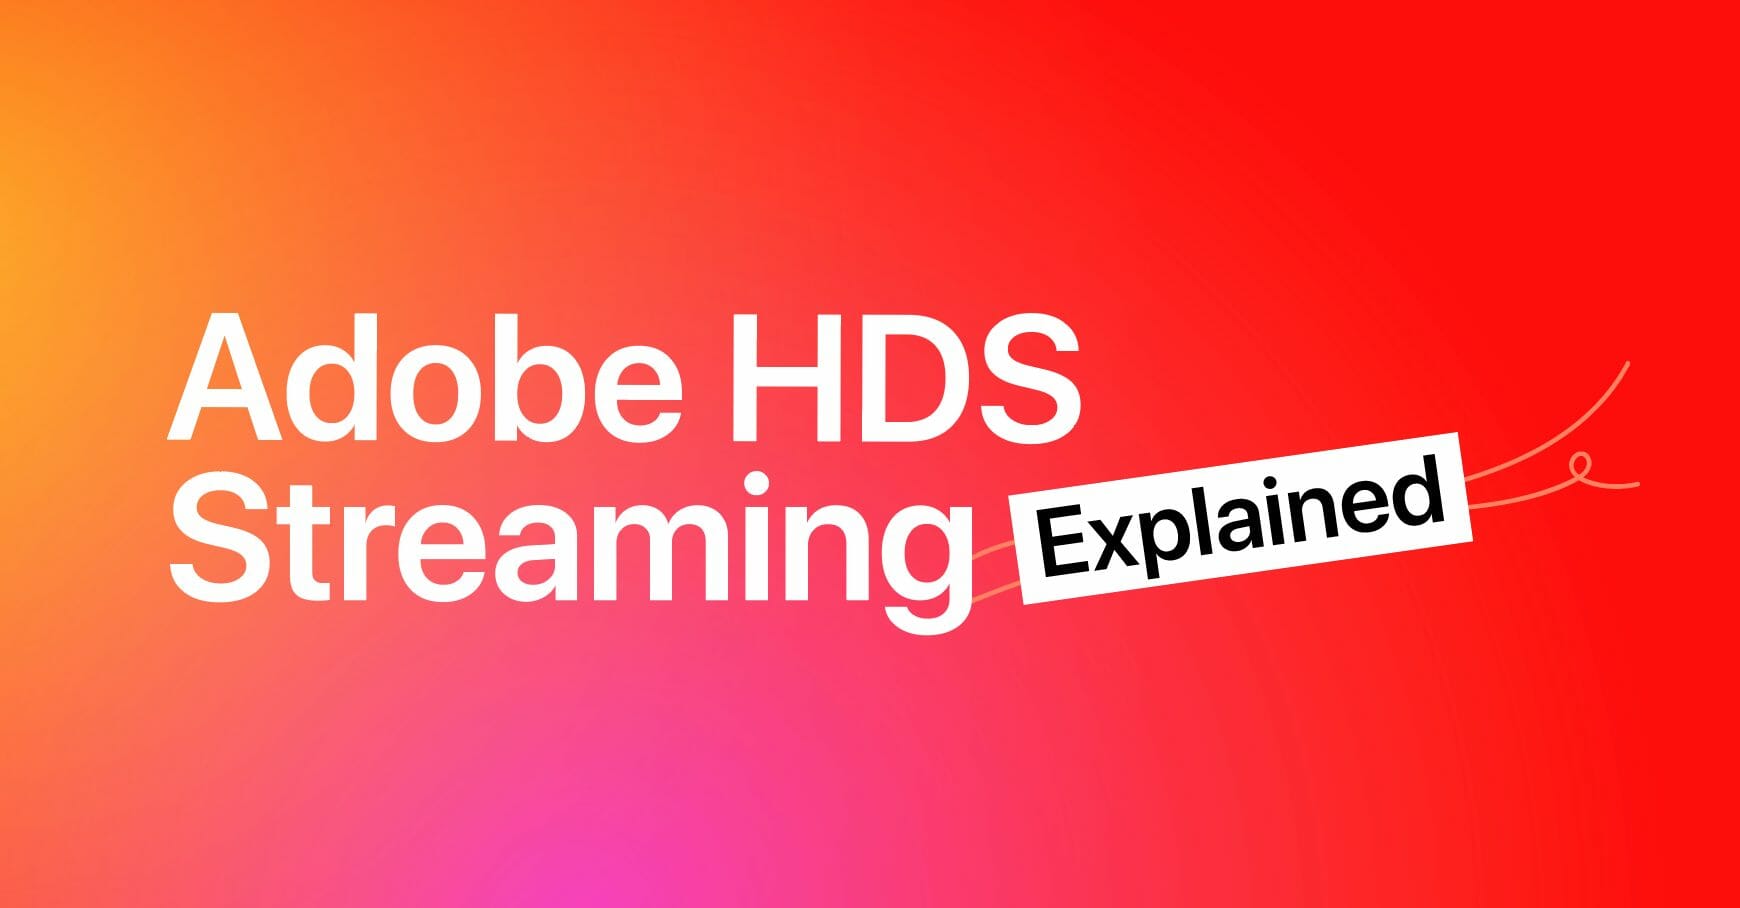 Adobe HDS Streaming Explained